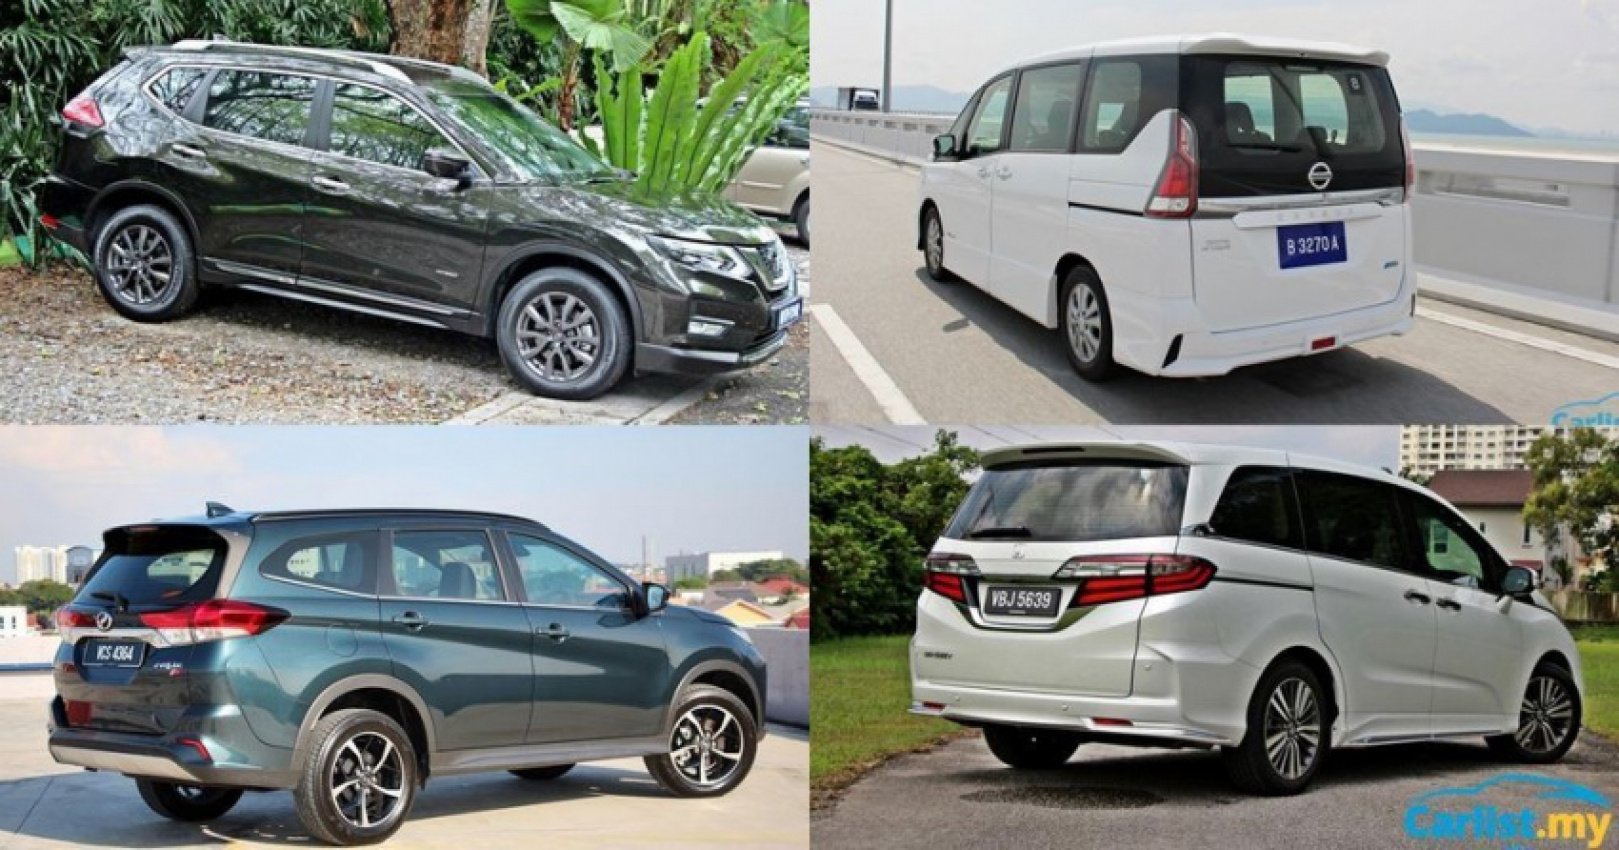 autos, cars, reviews, 5 seater, 7 seater, buying guide, insights, mpv, suv, mpv or suv? what car to buy depending on family size